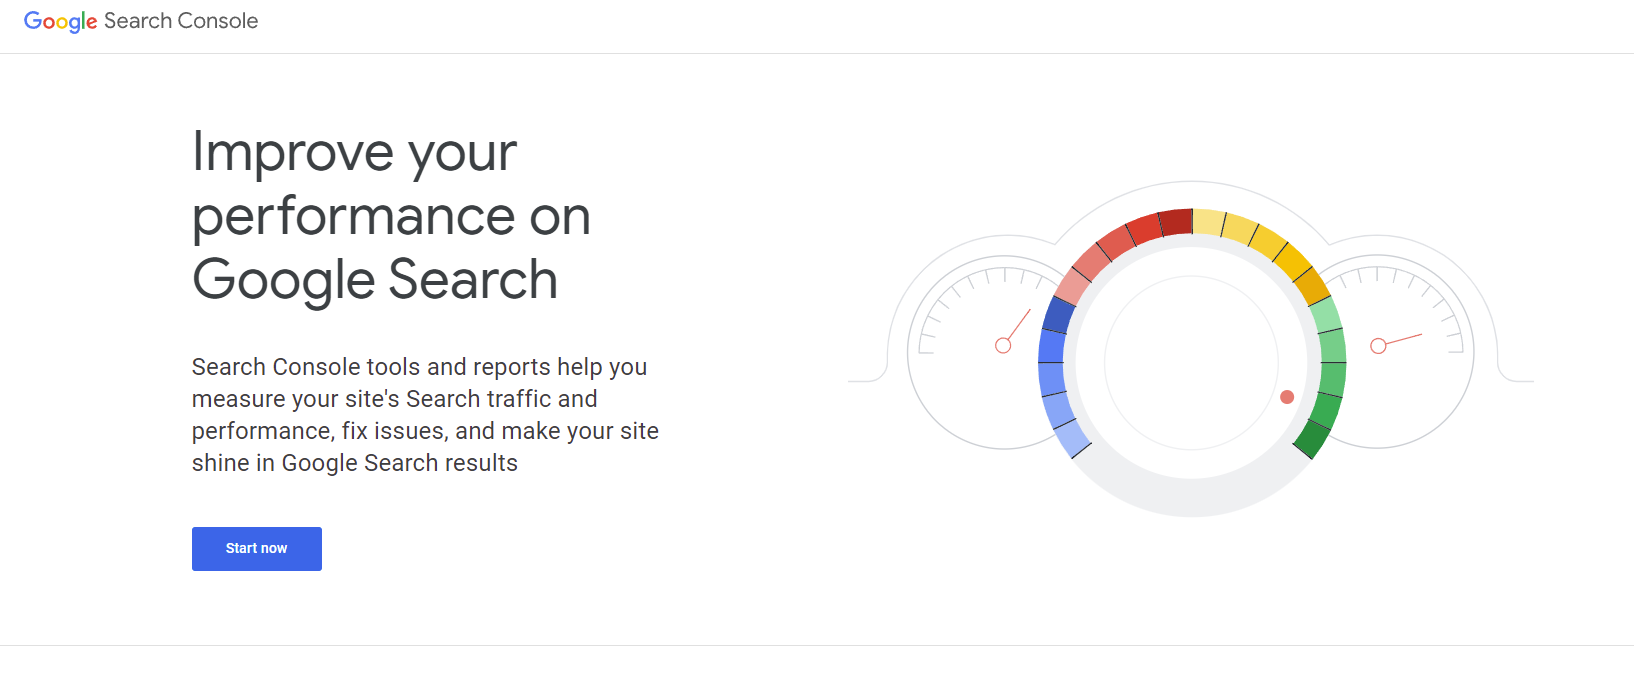 Screen shot of the Google Search Console landing page with a console graphic and text. 